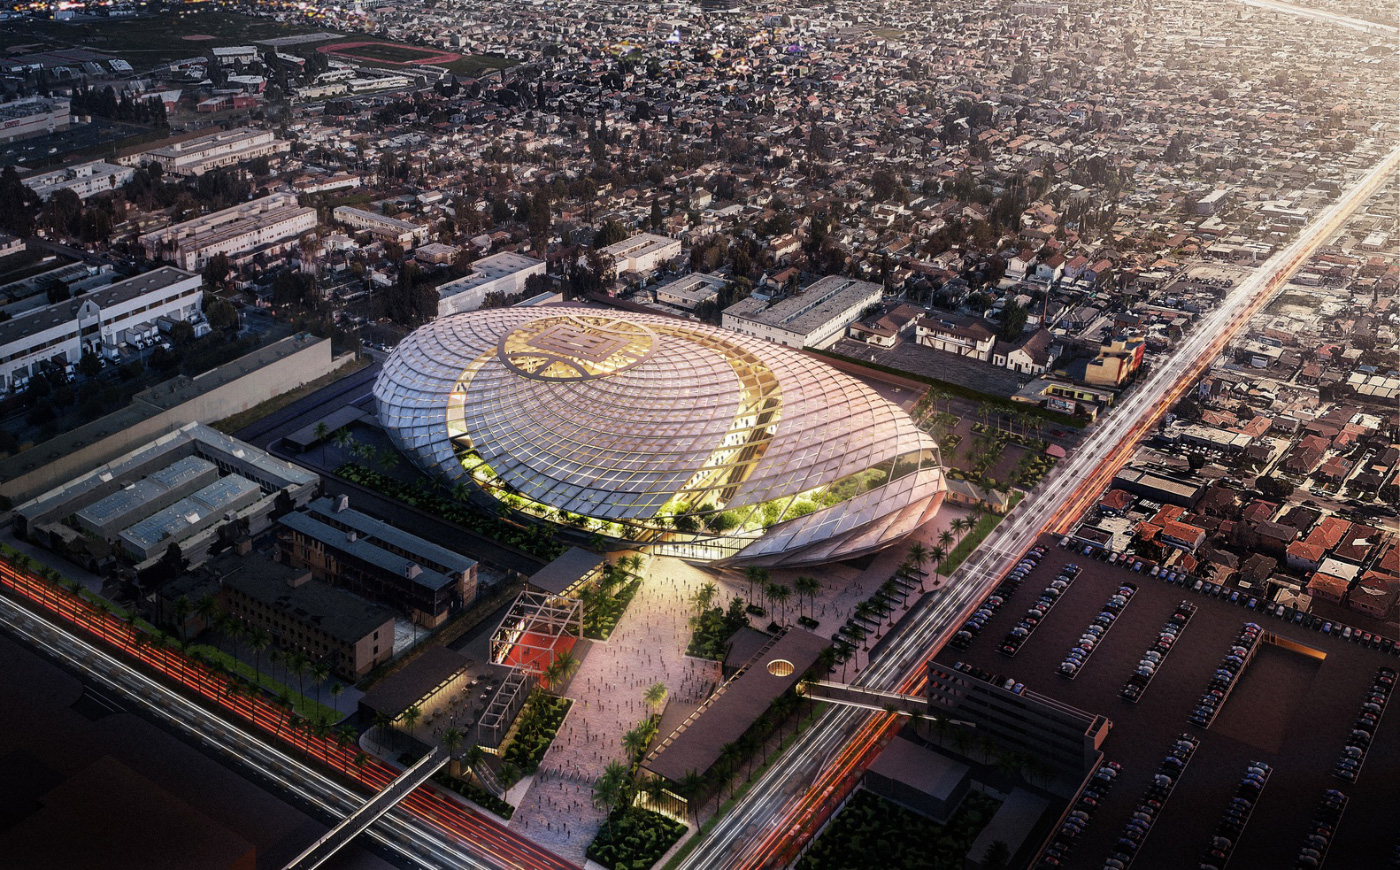 Aerial rendering of the new Clippers arena, which features a distinctive net-like facade